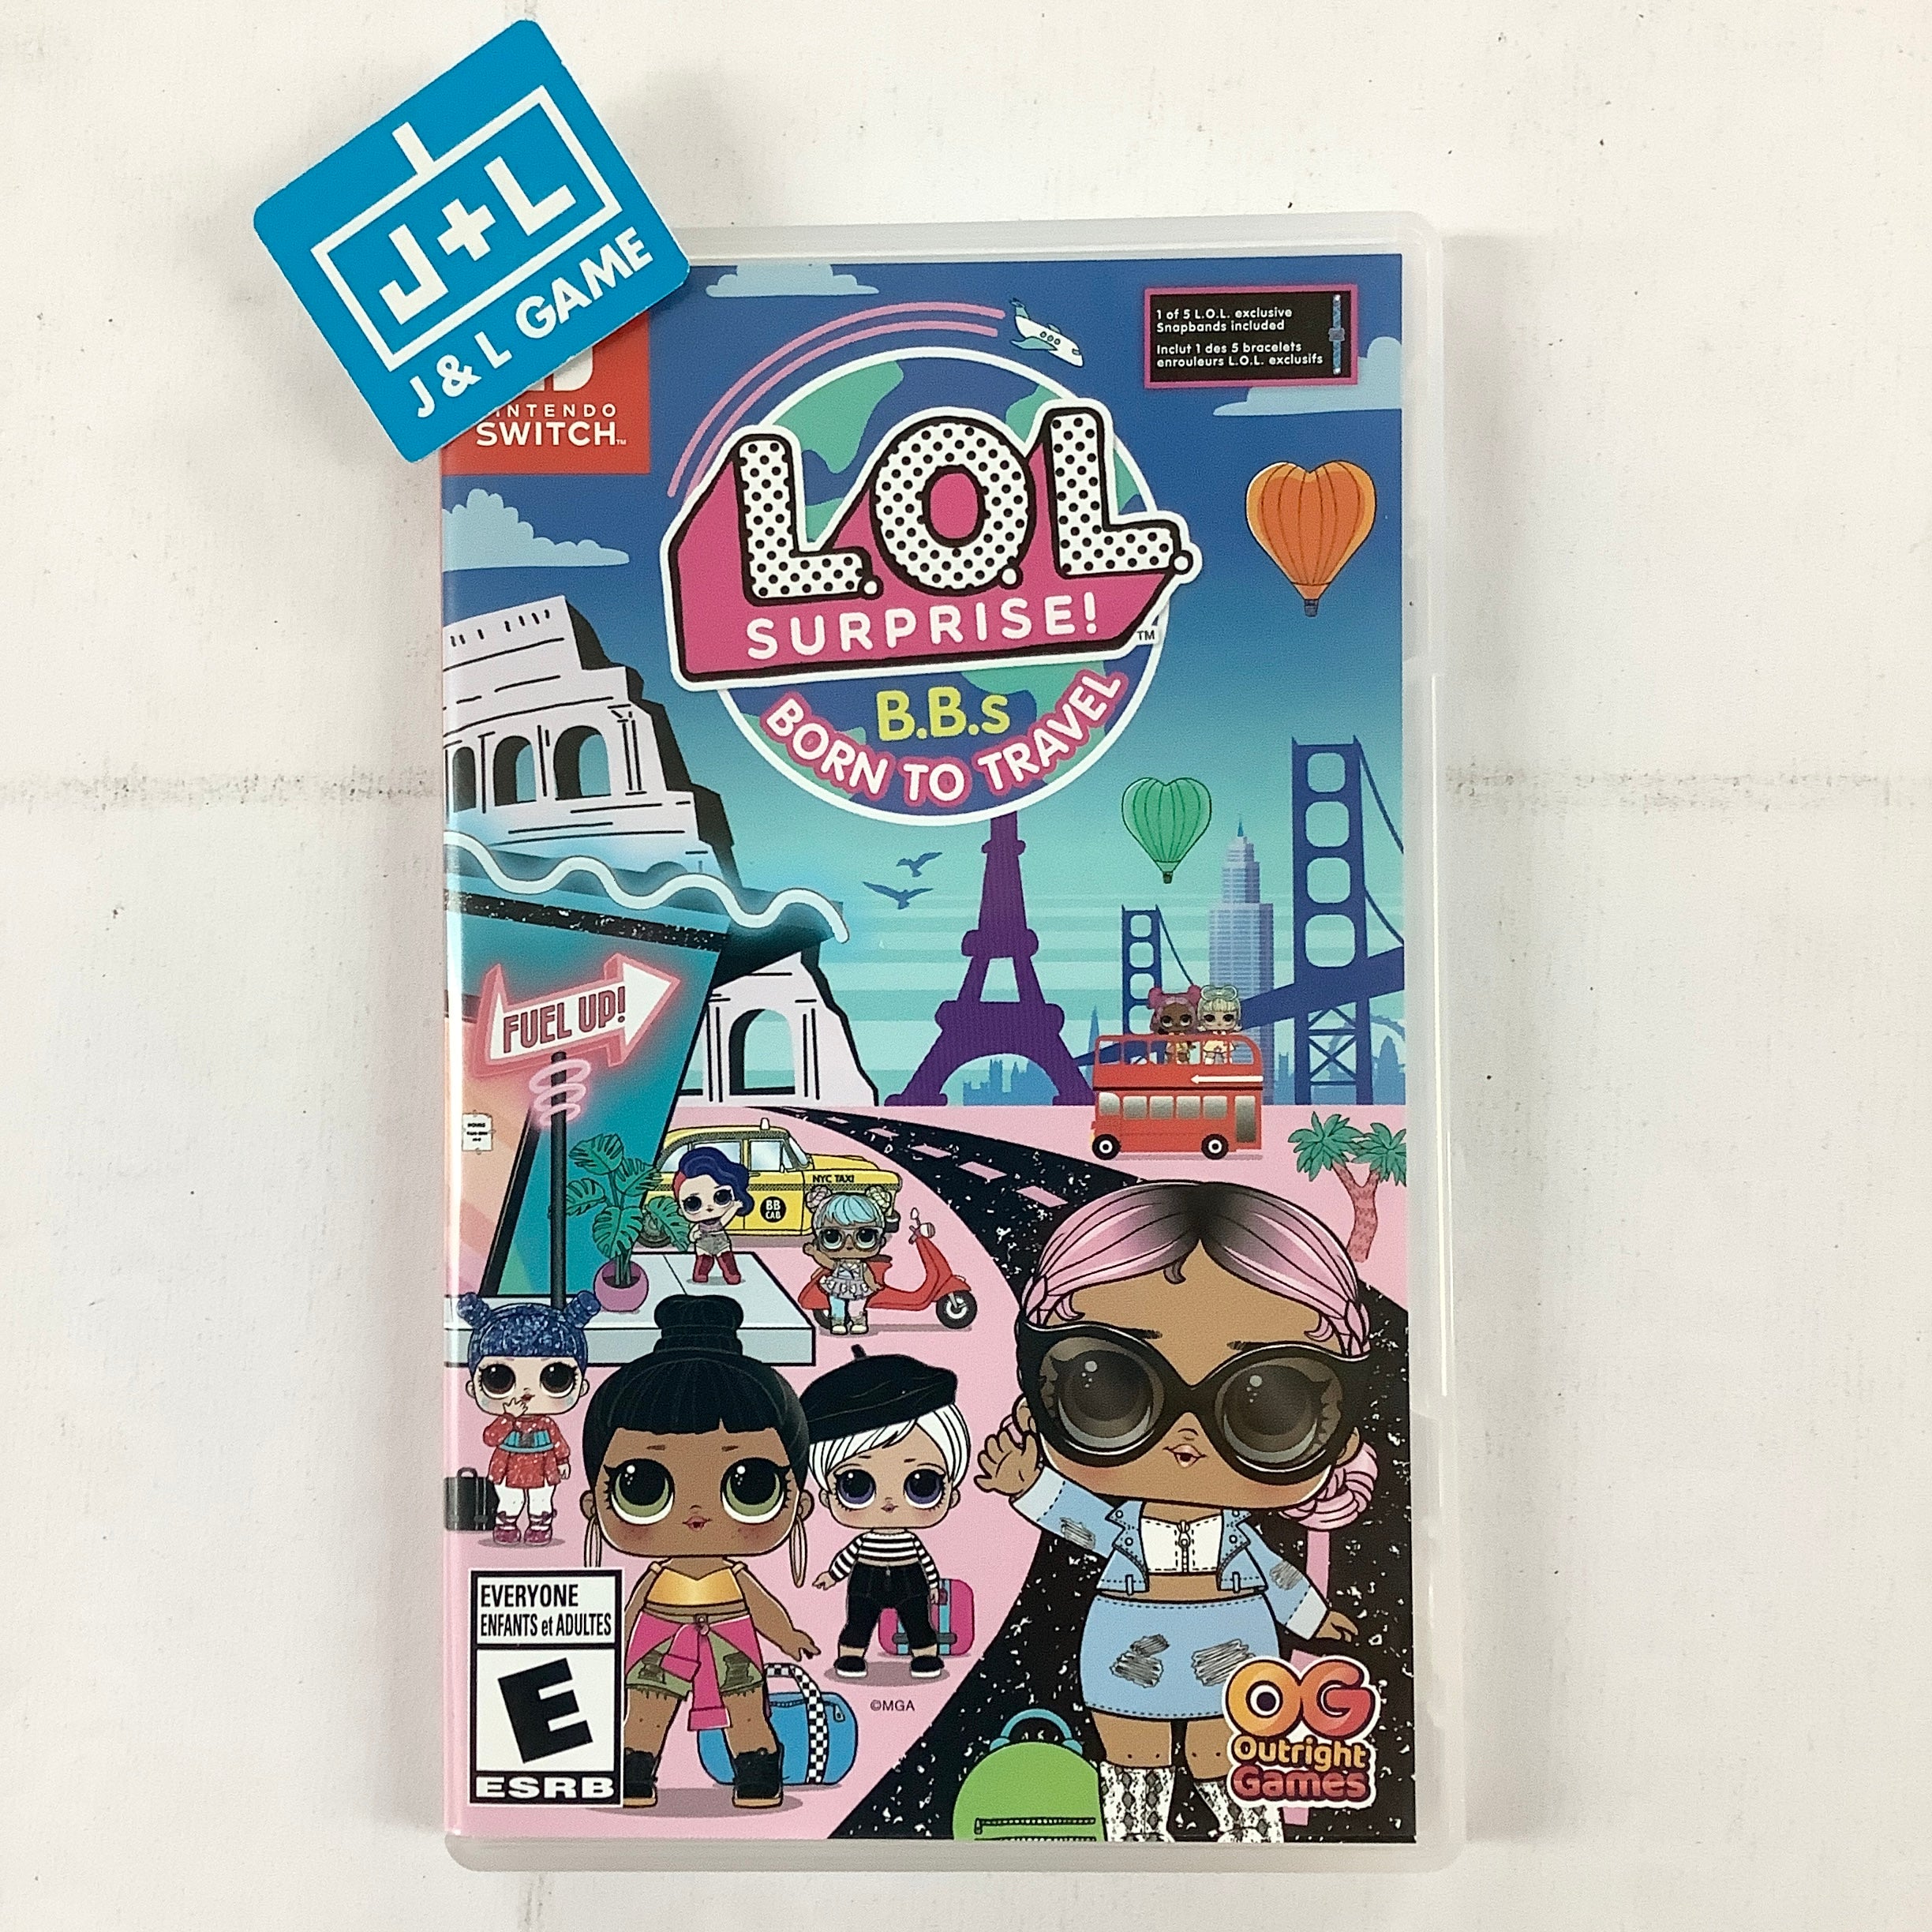 L.O.L. Surprise! B.B.s Born to Travel - (NSW) Nintendo Switch [UNBOXING] Video Games Outright Games   